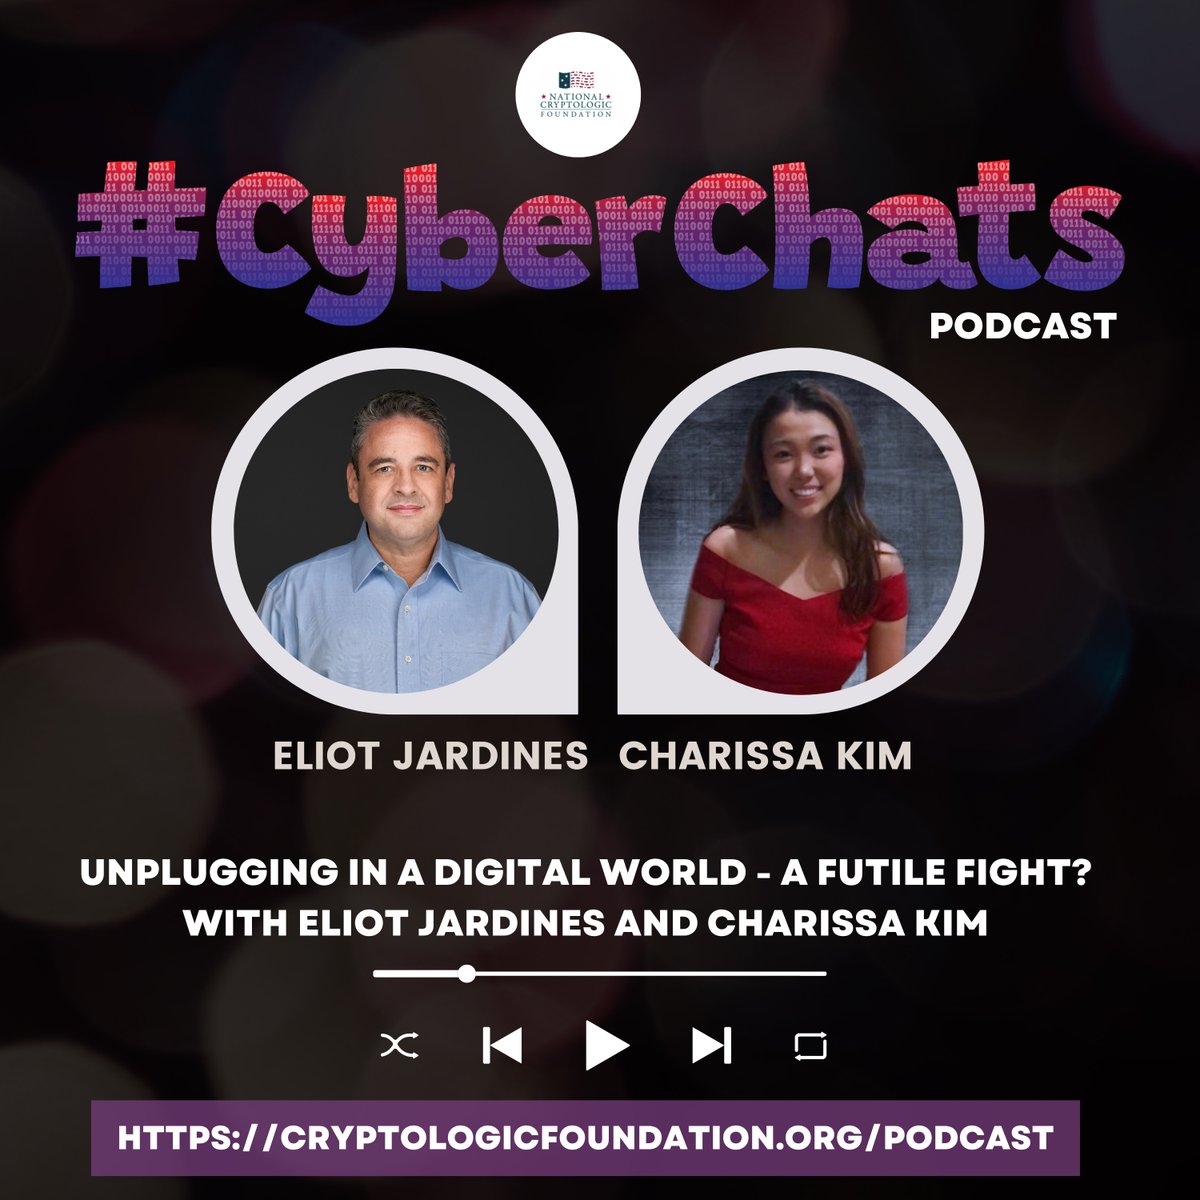 Stay tuned for our first episode of #CyberChats! We’re talking about all things social media and how devices are constantly connected. Check out the episode on cryptologicfoundation.org/podcast or wherever you listen to your podcasts. #cybereducation #highschool #middleschool  l